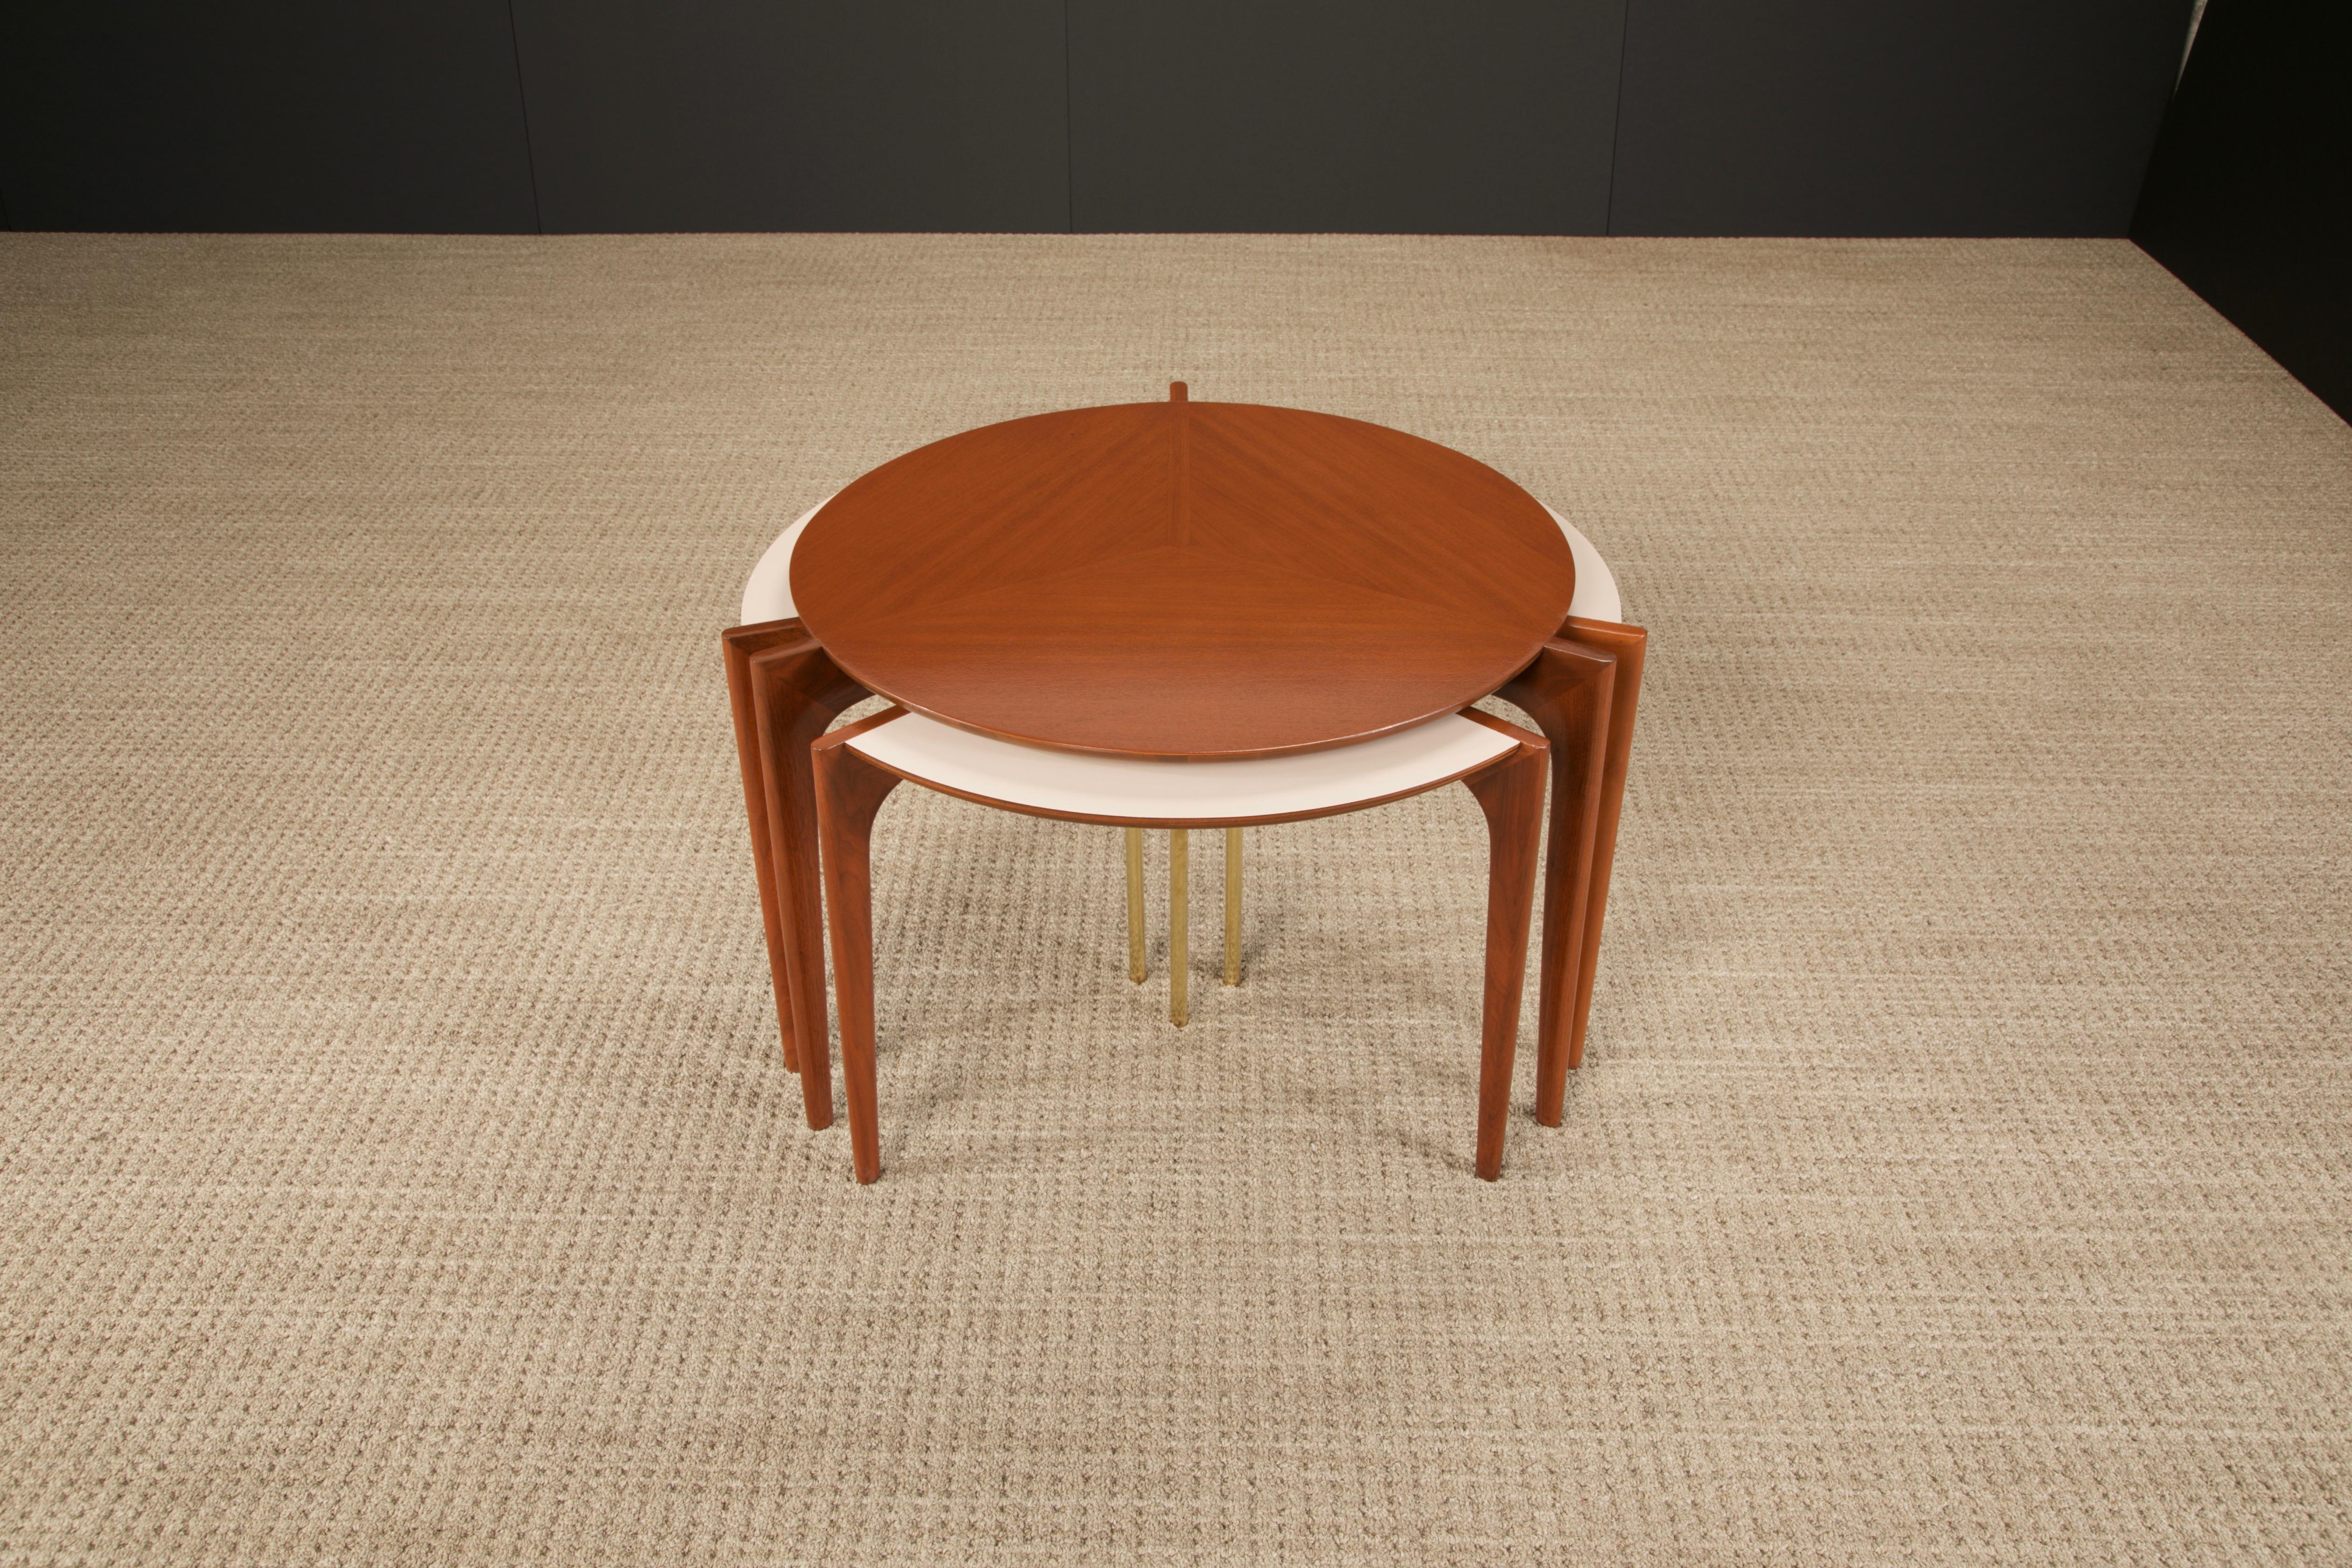 An extremely rare collectors set of nesting tables by Vladimir Kagan for Grosfeld House (1950's USA), fully restored. This set is signed underneath the center table with original Grosfeld House sticker label, and documented in early Grosfeld House